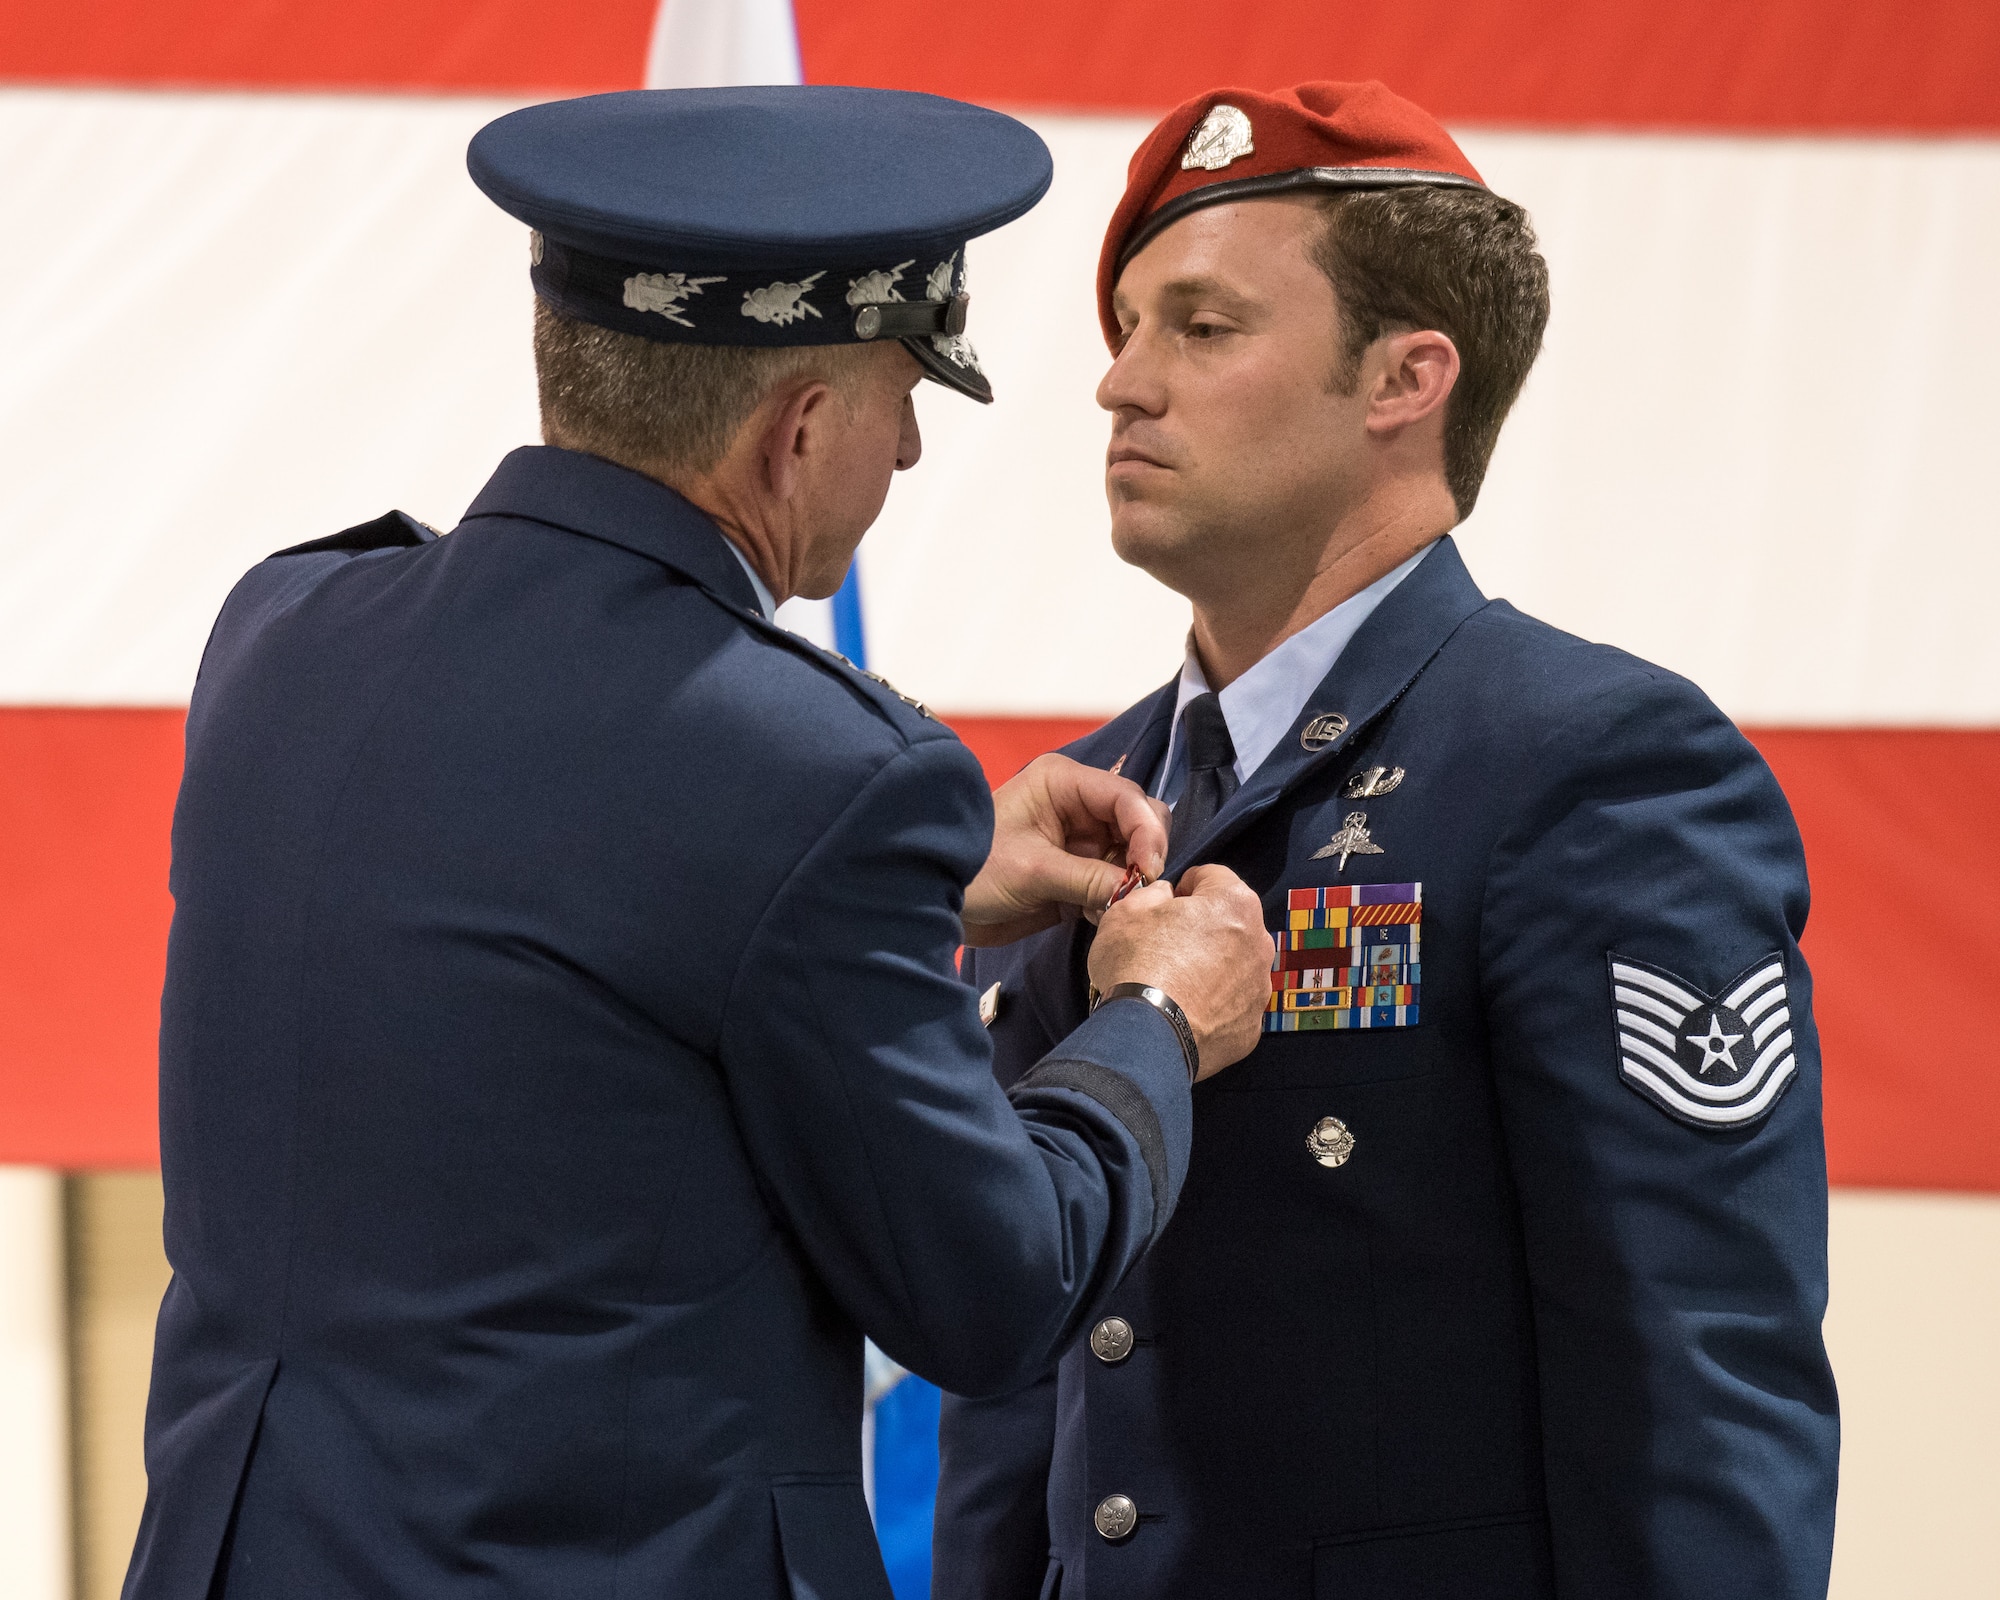 Air Force Chief of Staff Gen. David L. Goldfein (left) pins the Air Force Cross to the uniform of Tech. Sgt. Daniel Keller, a combat controller in the 123rd Special Tactics Squadron, during a ceremony at the Kentucky Air National Guard Base in Louisville, Ky, Aug.13, 2019. Keller earned the award — second only to the Medal of Honor — for valor on the battlefield in Afghanistan. (U.S. Air National Guard photo by Dale Greer)